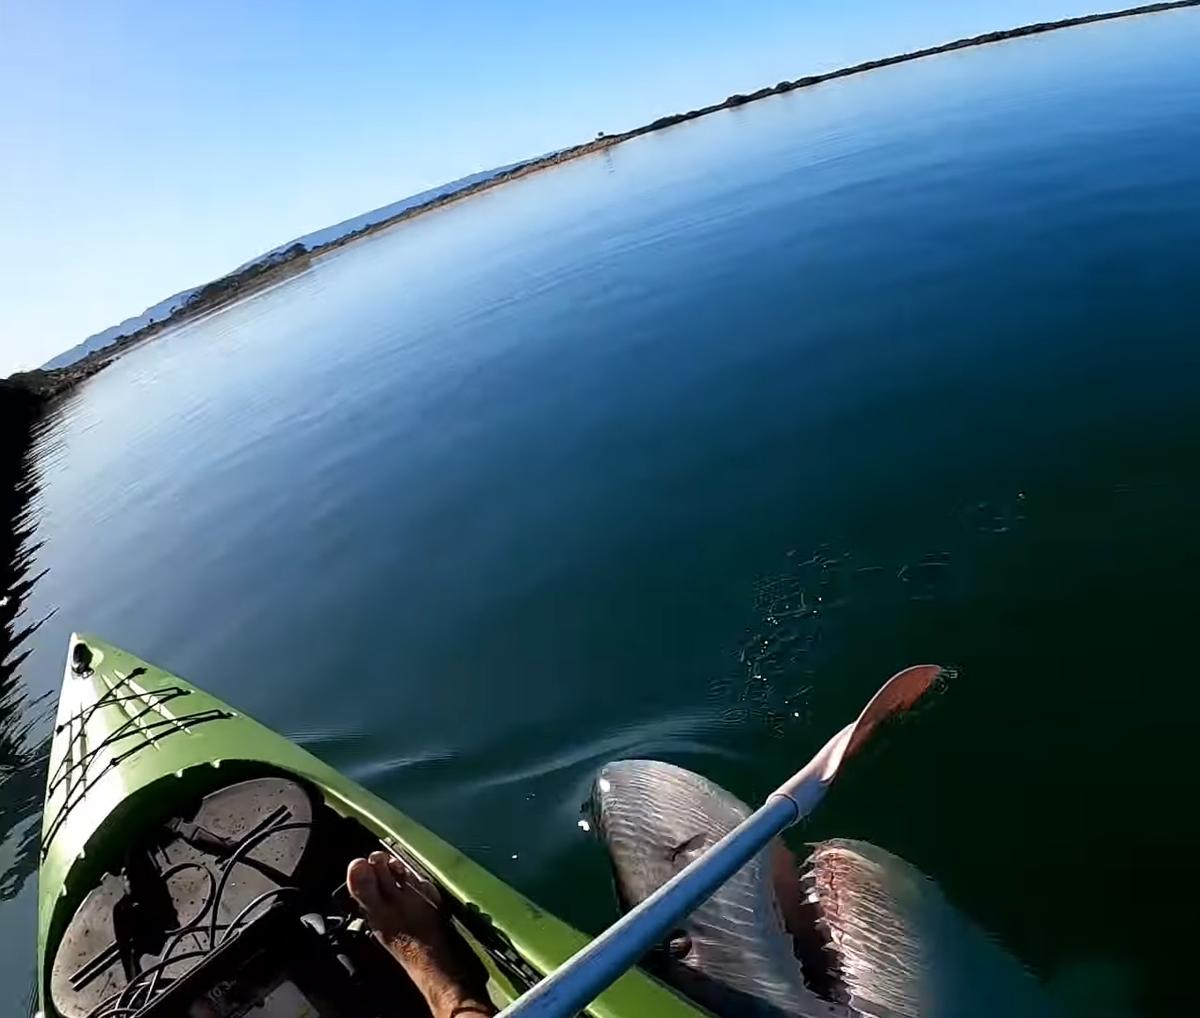 The shark's teeth and eyes are clearly visible in Gorne's footage as it lunges at his paddle. (Courtesy of <a href="https://www.facebook.com/matthew.gorne">Matthew Gorne</a>)